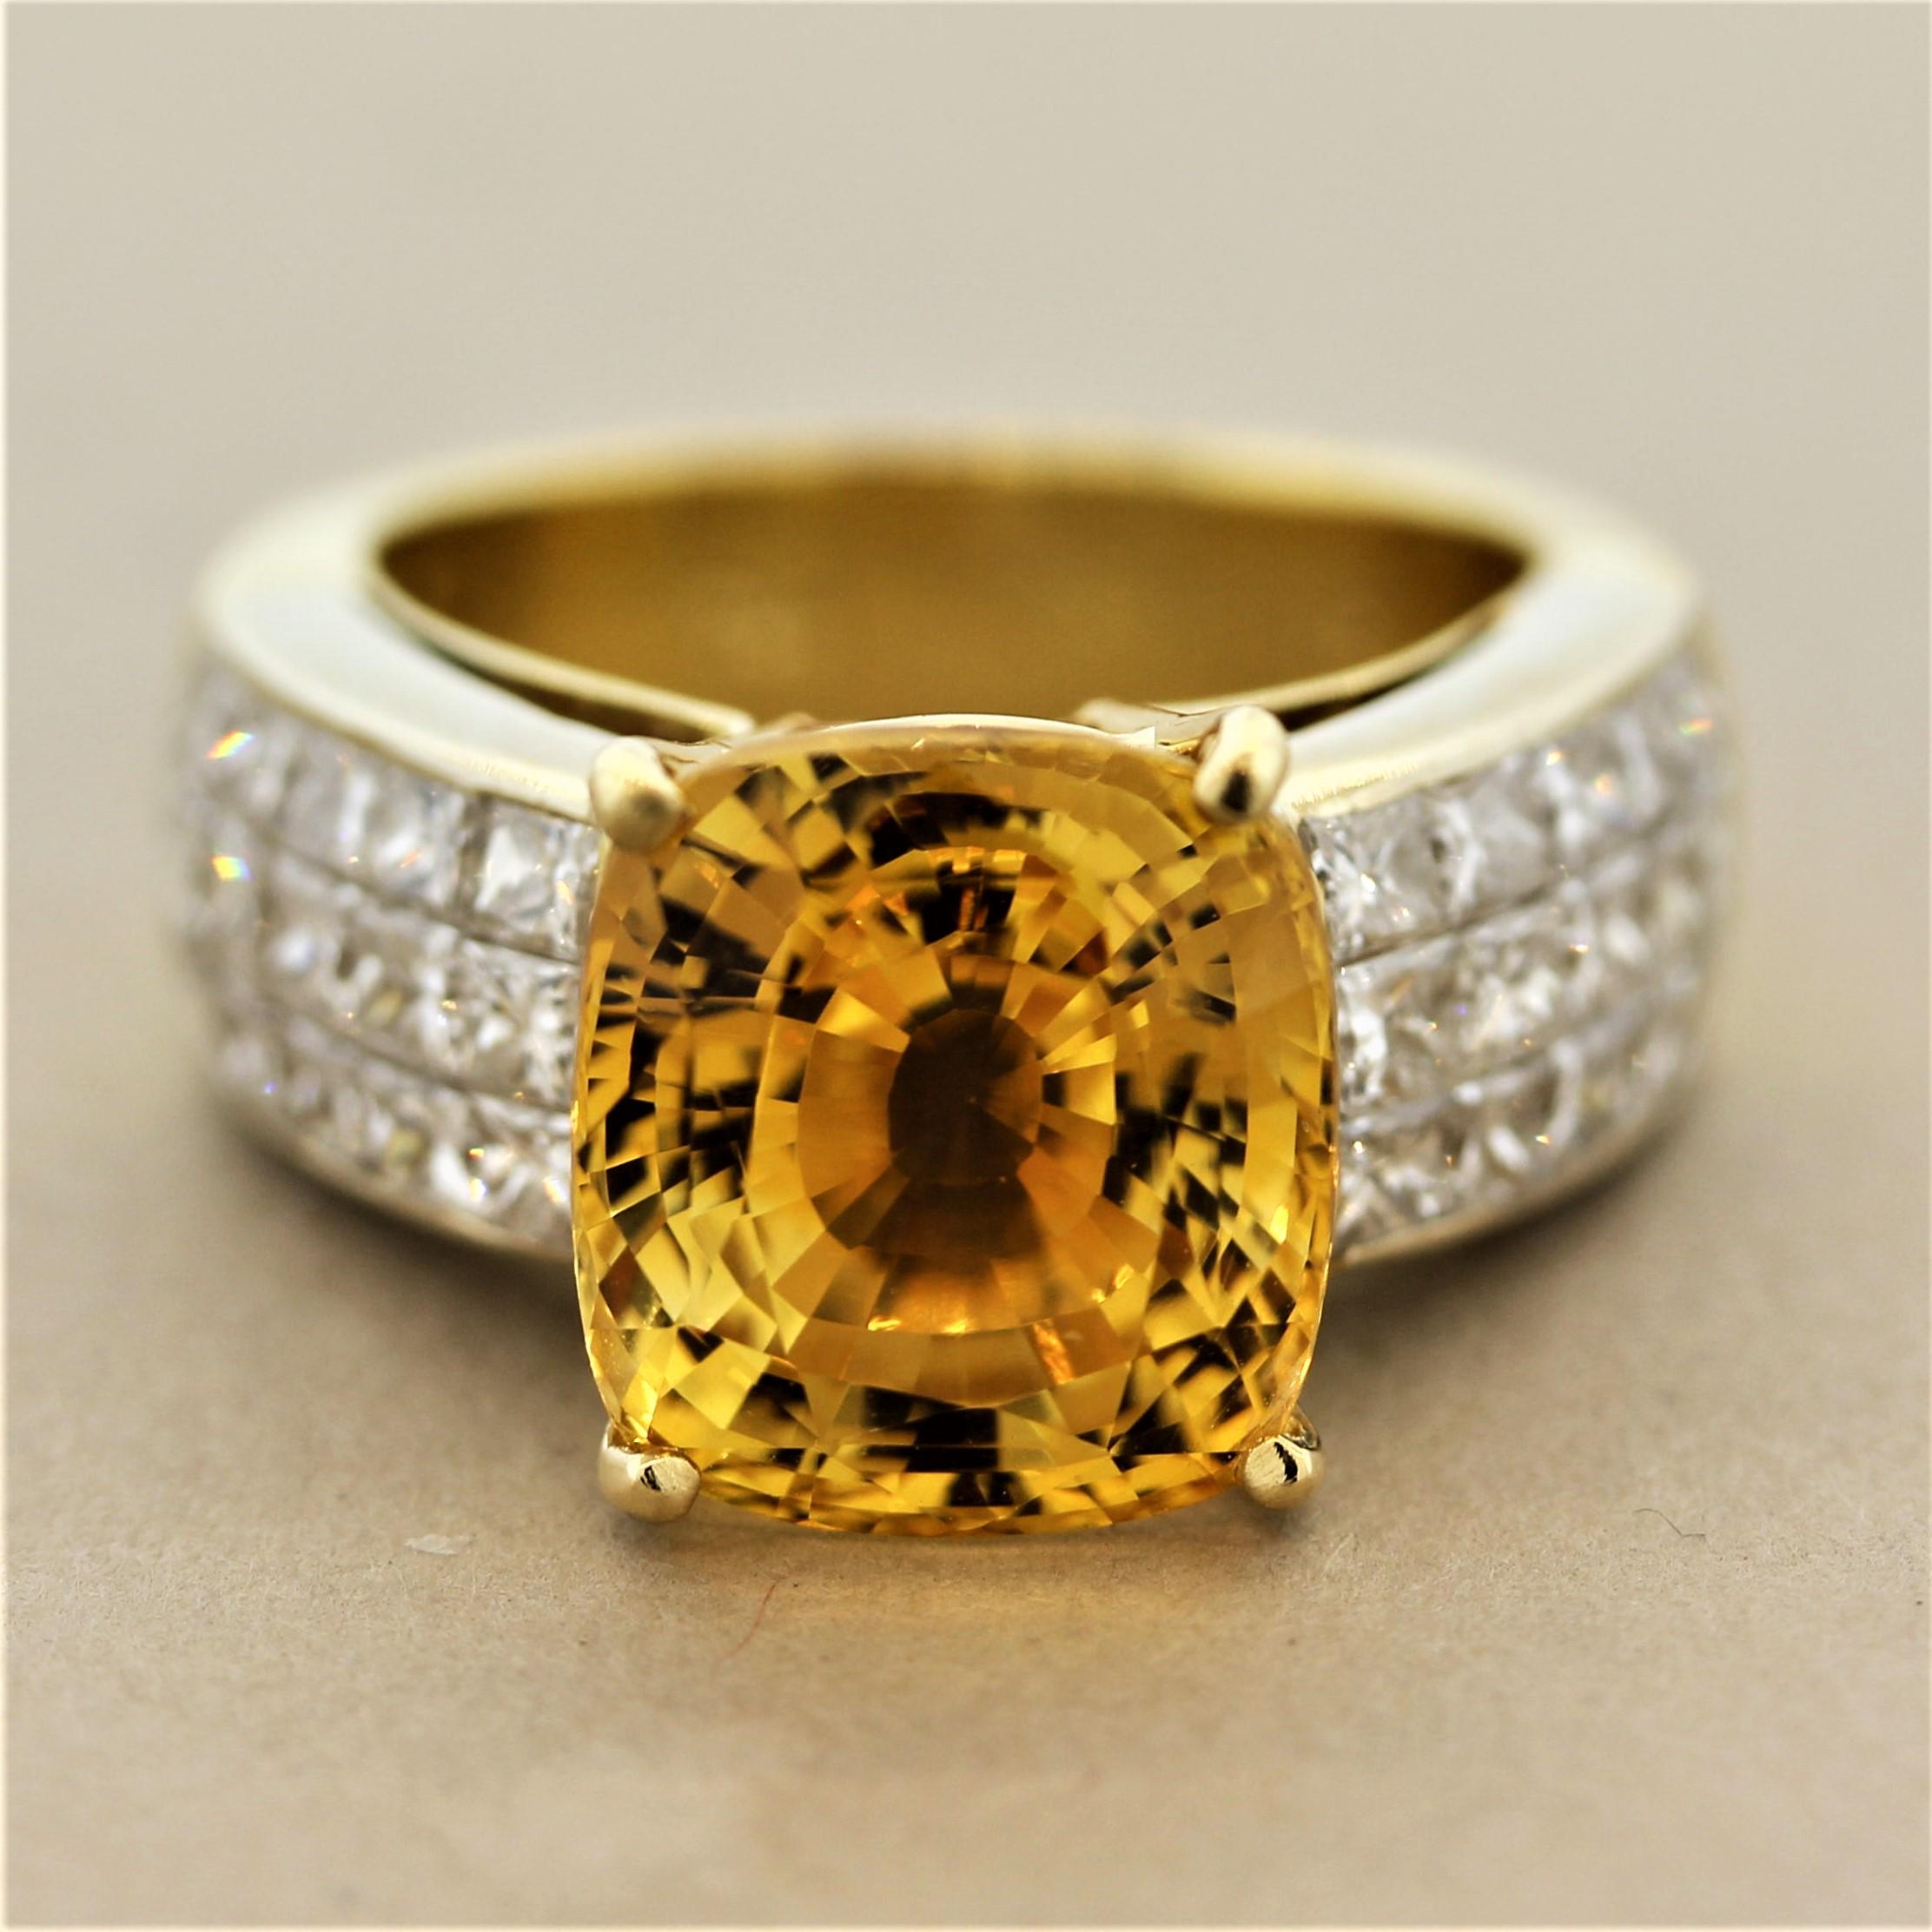 A superb extra-fine quality sapphire with a vivid and electric yellow color with a touch or orange. It is shaped as a cushion and weighs 8.50 carats with no eye-visible inclusions, a true gem. It is complemented by 2 carats of princess-cut diamonds